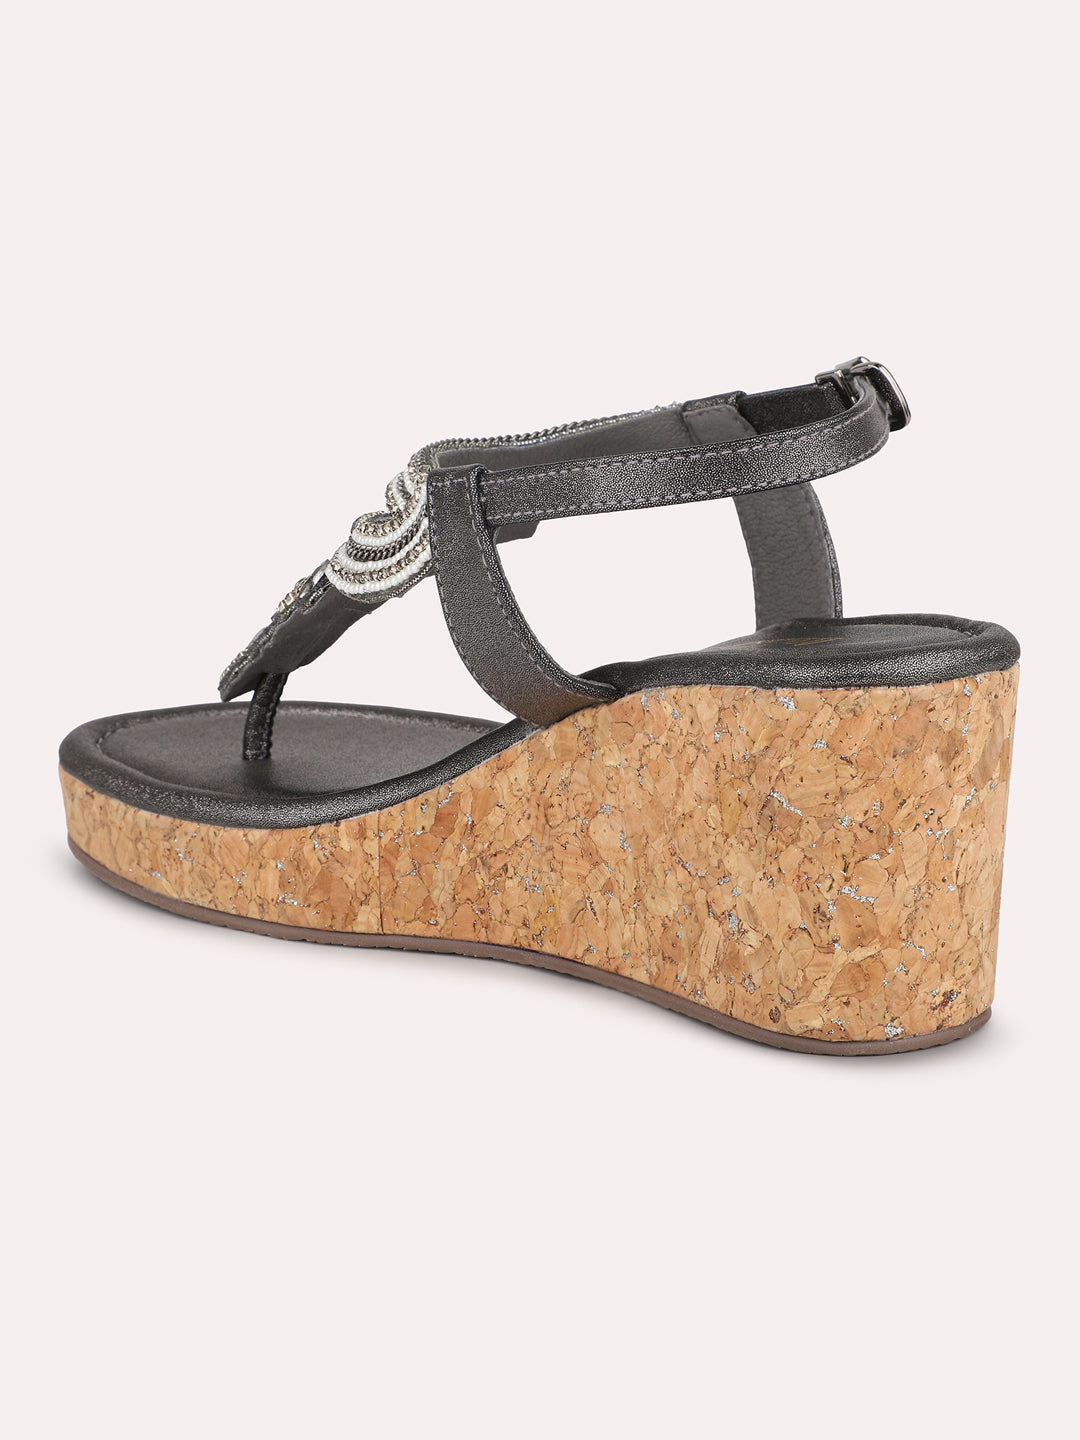 Women Pewter Ethnic Embellished Wedges with Buckle Closure